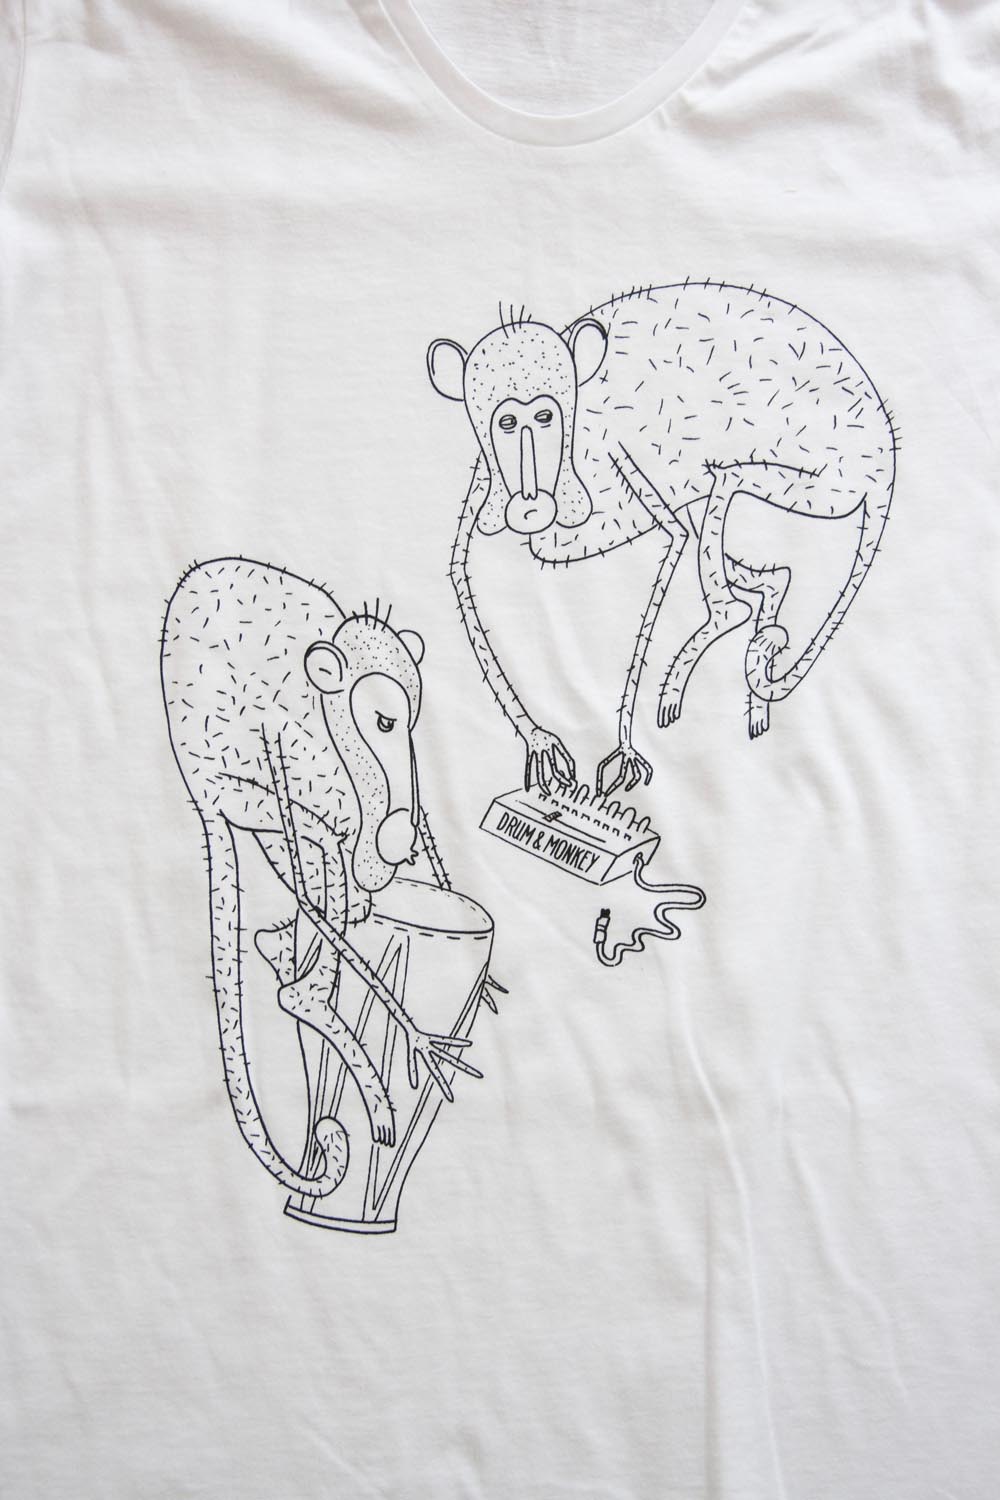 Drum and Monkey Apes  T-Shirt  